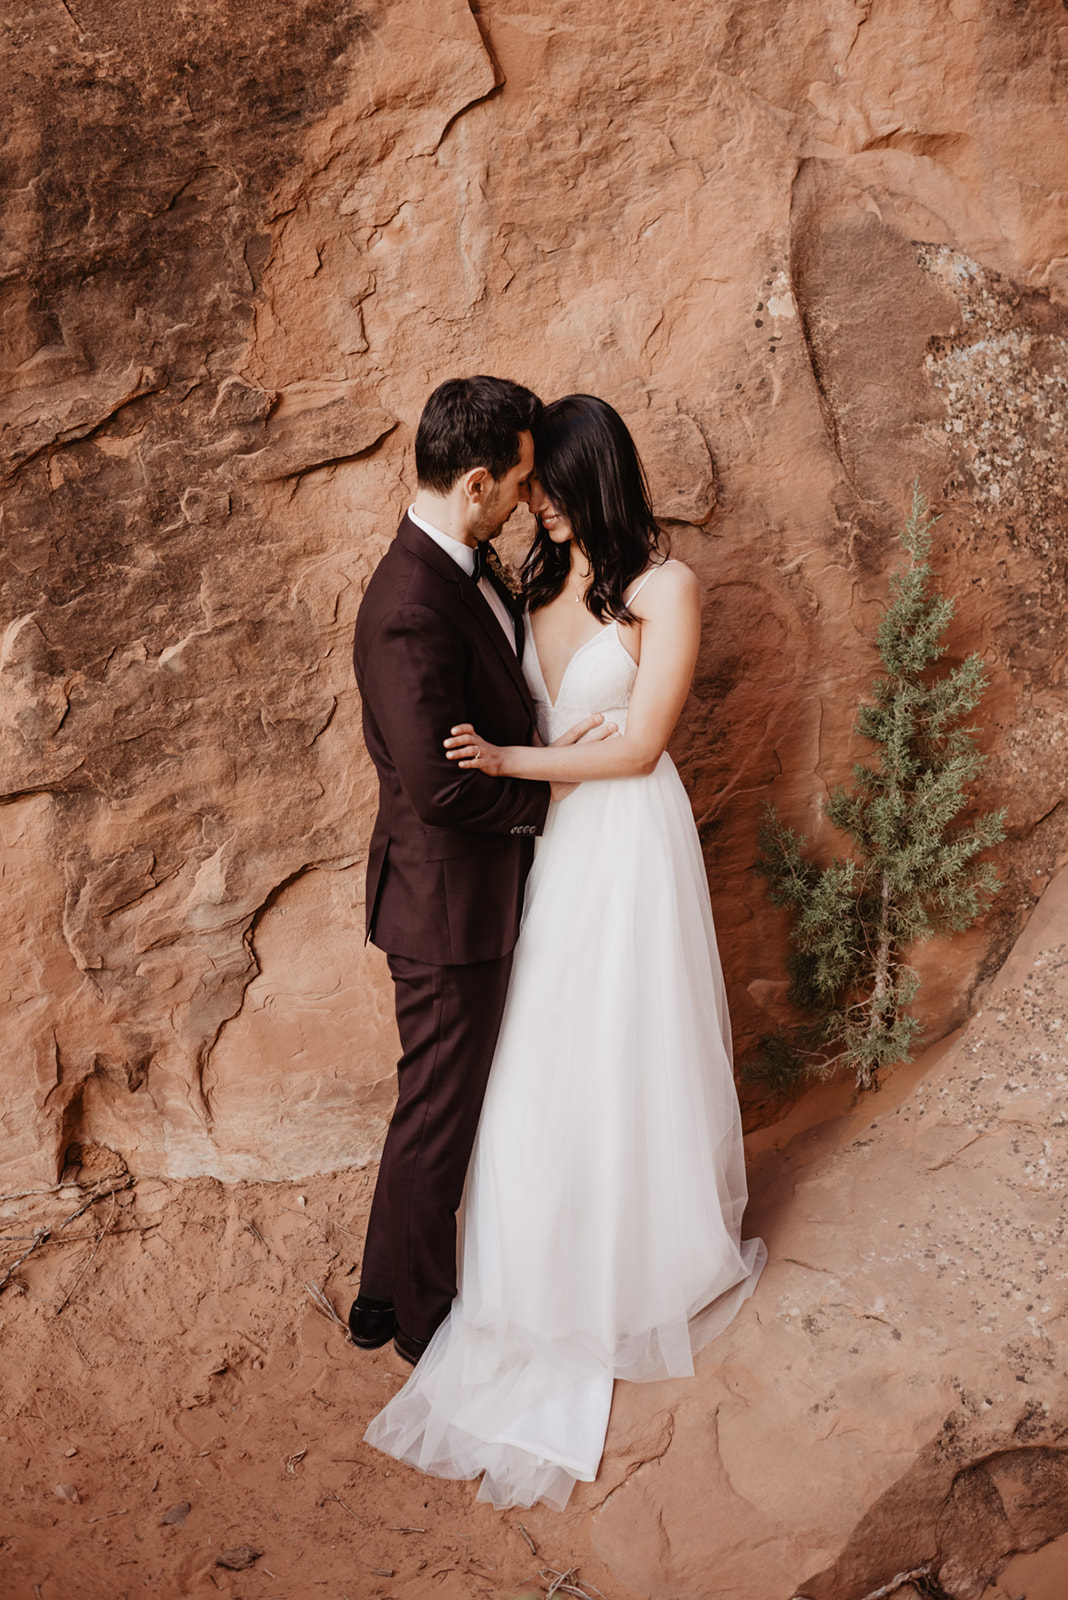 Utah Elopement photographers captures romantic wedding portraits with bride and groom embracing against red rock in Moab wedding